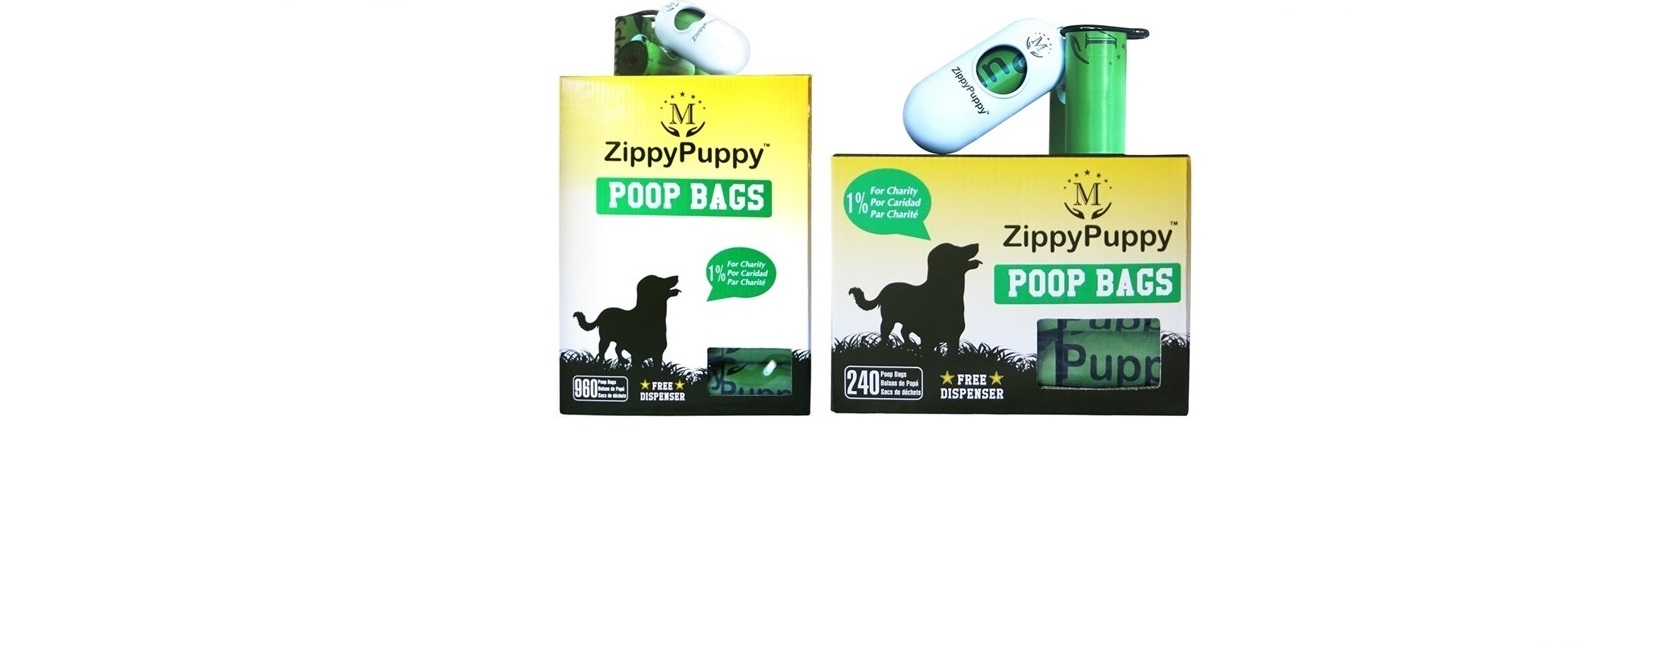 Biodegradable pet waste bags